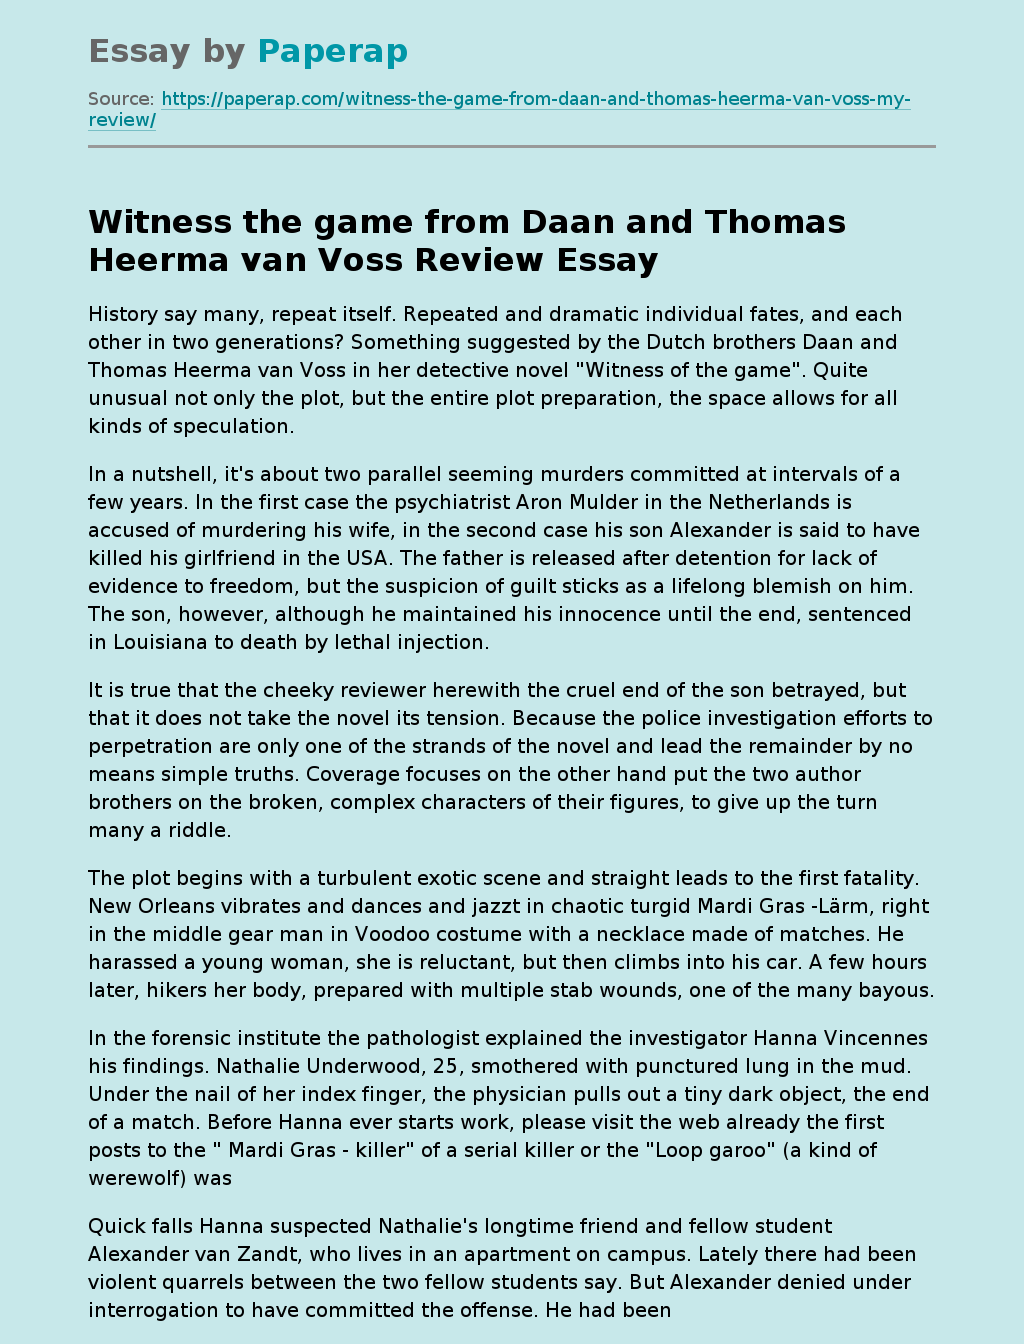 Witness the game from Daan and Thomas Heerma van Voss Review